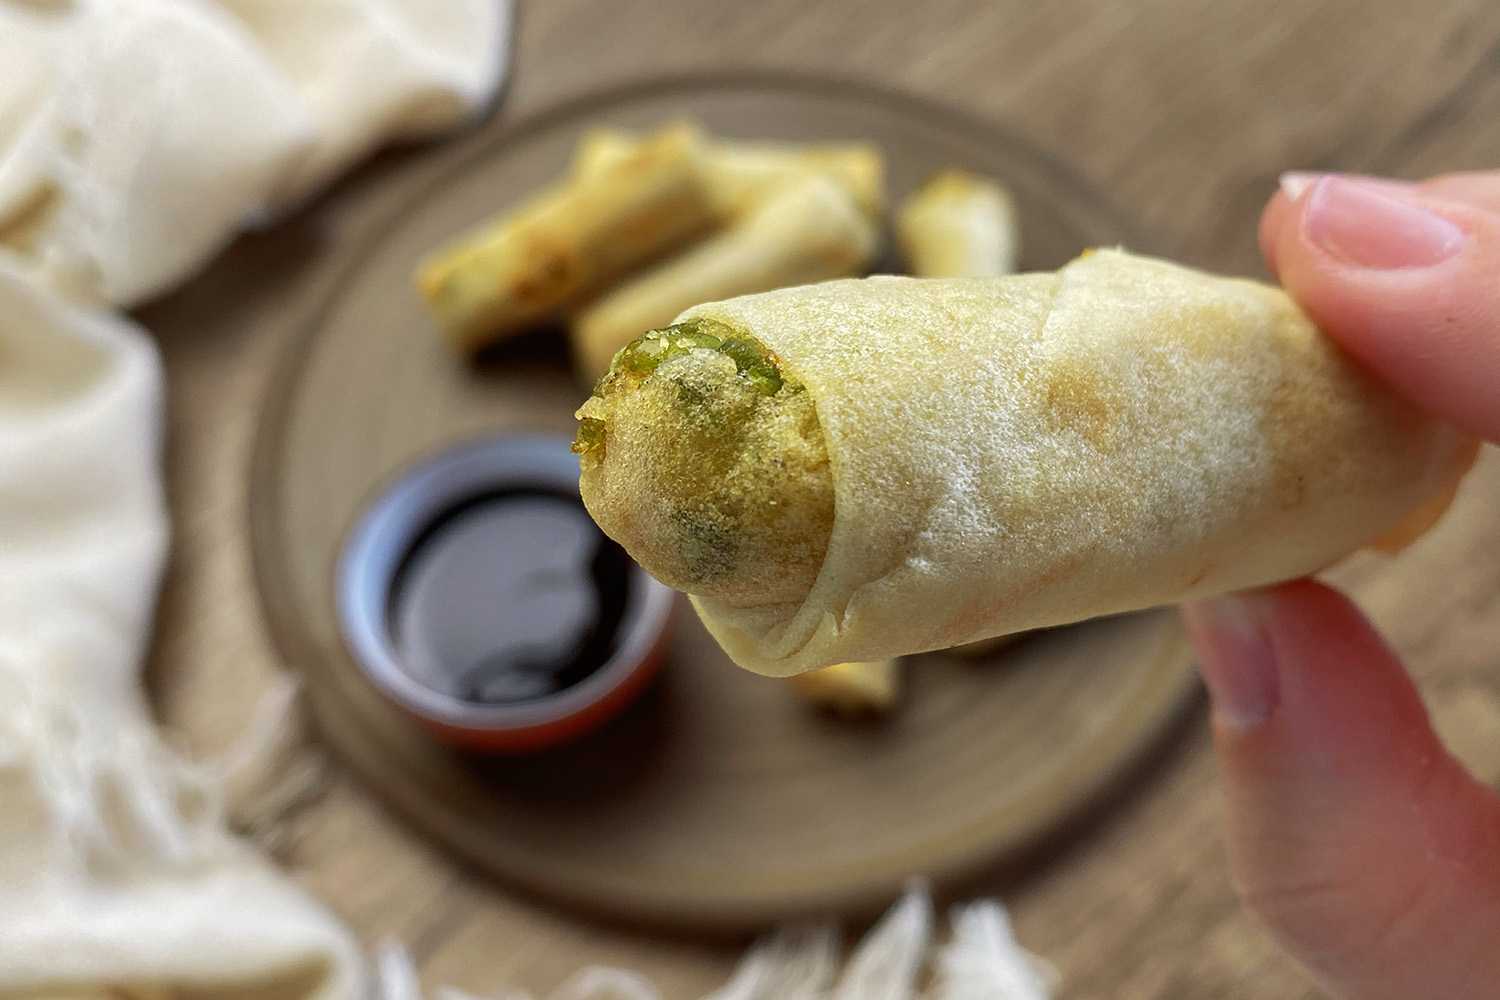 Cooking lumpia in your air fryer takes just 10 minutes